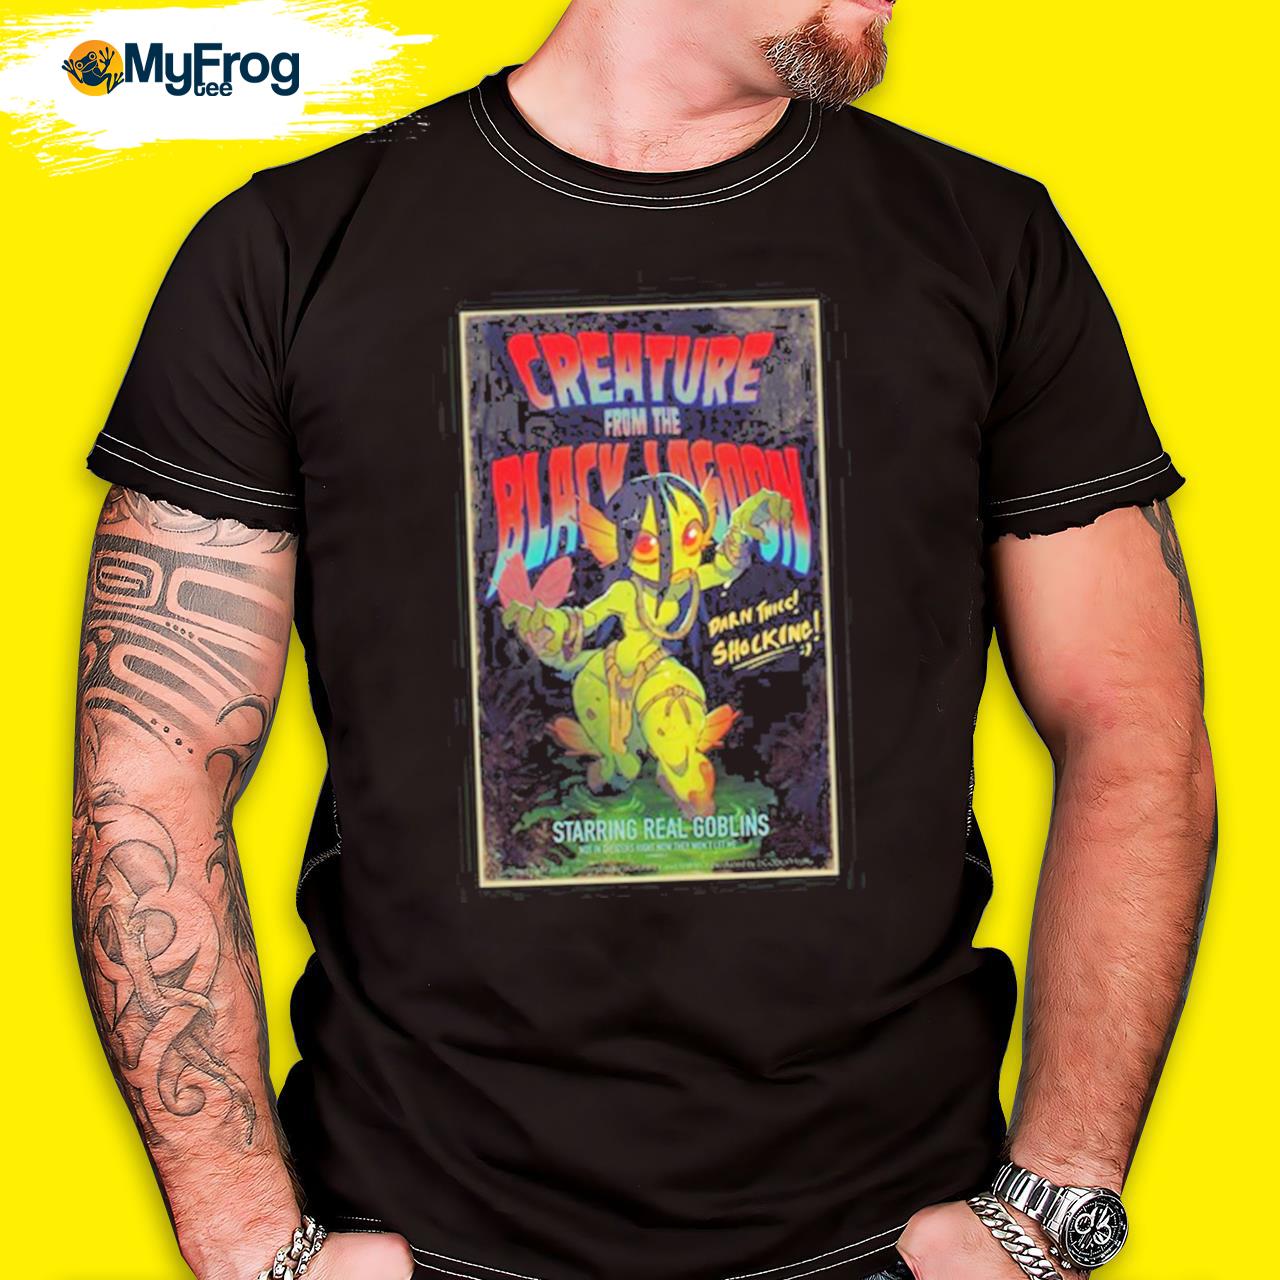 Creature From The Black Lagoon Starring Real Goblins Shirt